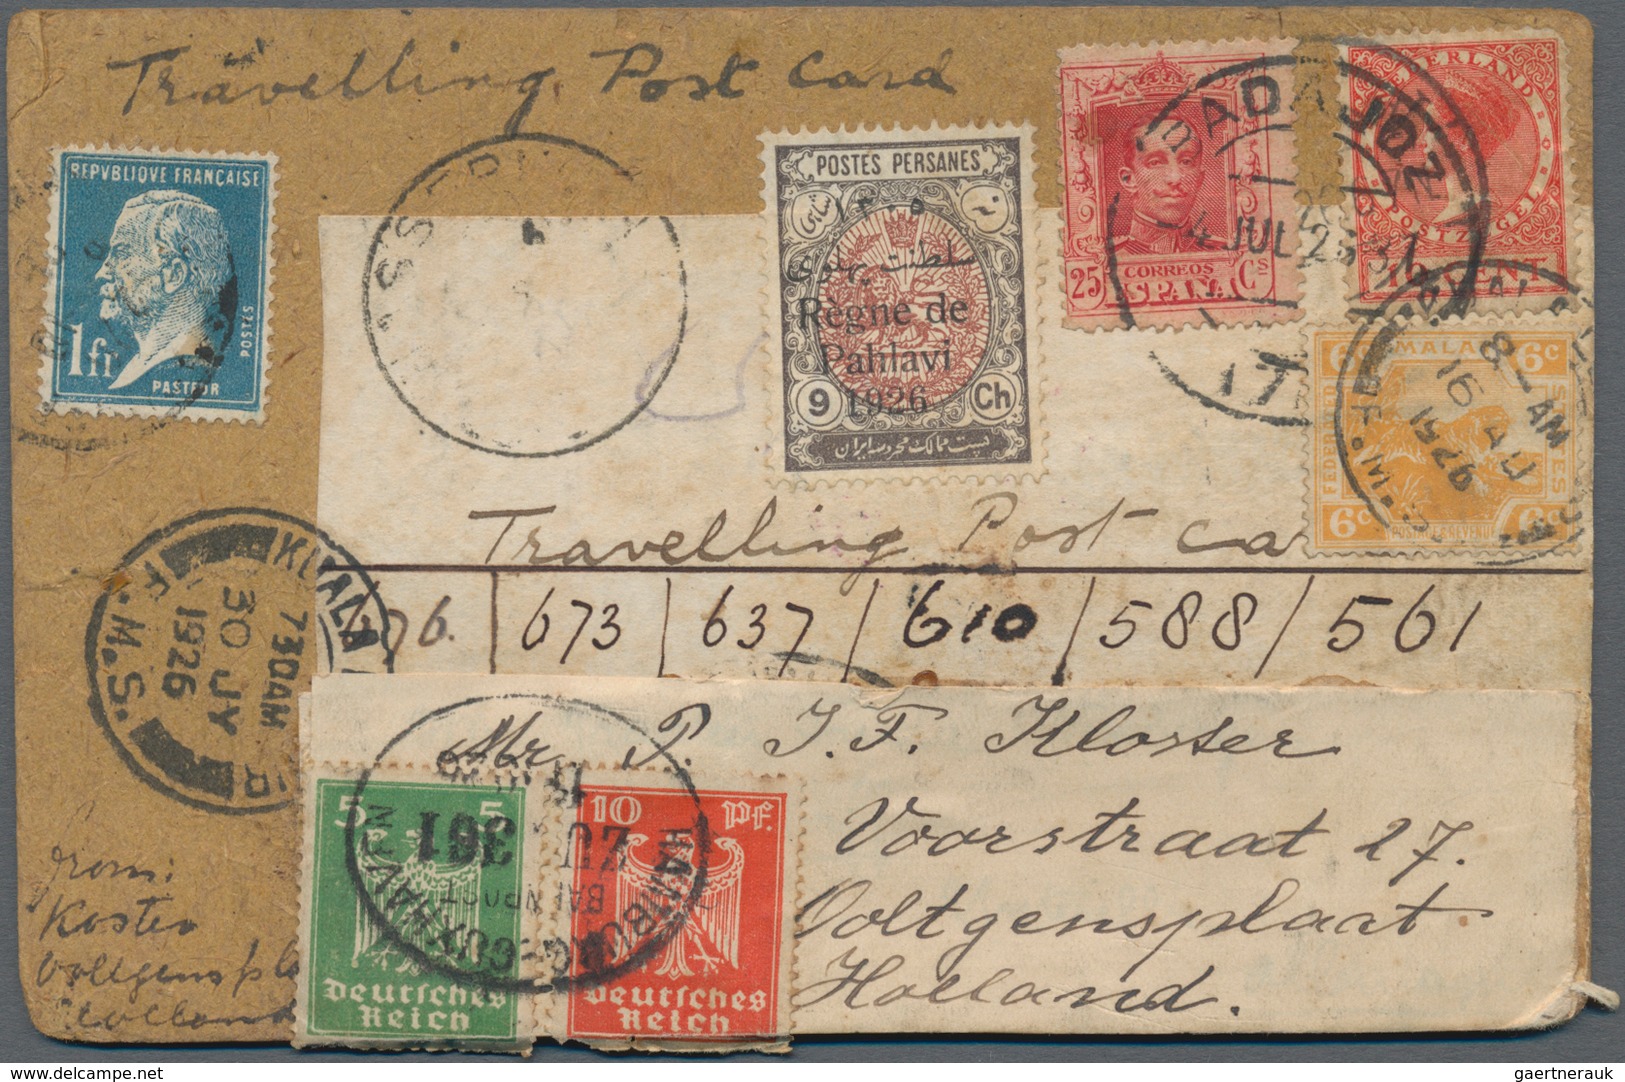 Malaiischer Staatenbund: 1926, 'Travelling Post Card' Sent Around The World With Stamps Of Federated - Federated Malay States